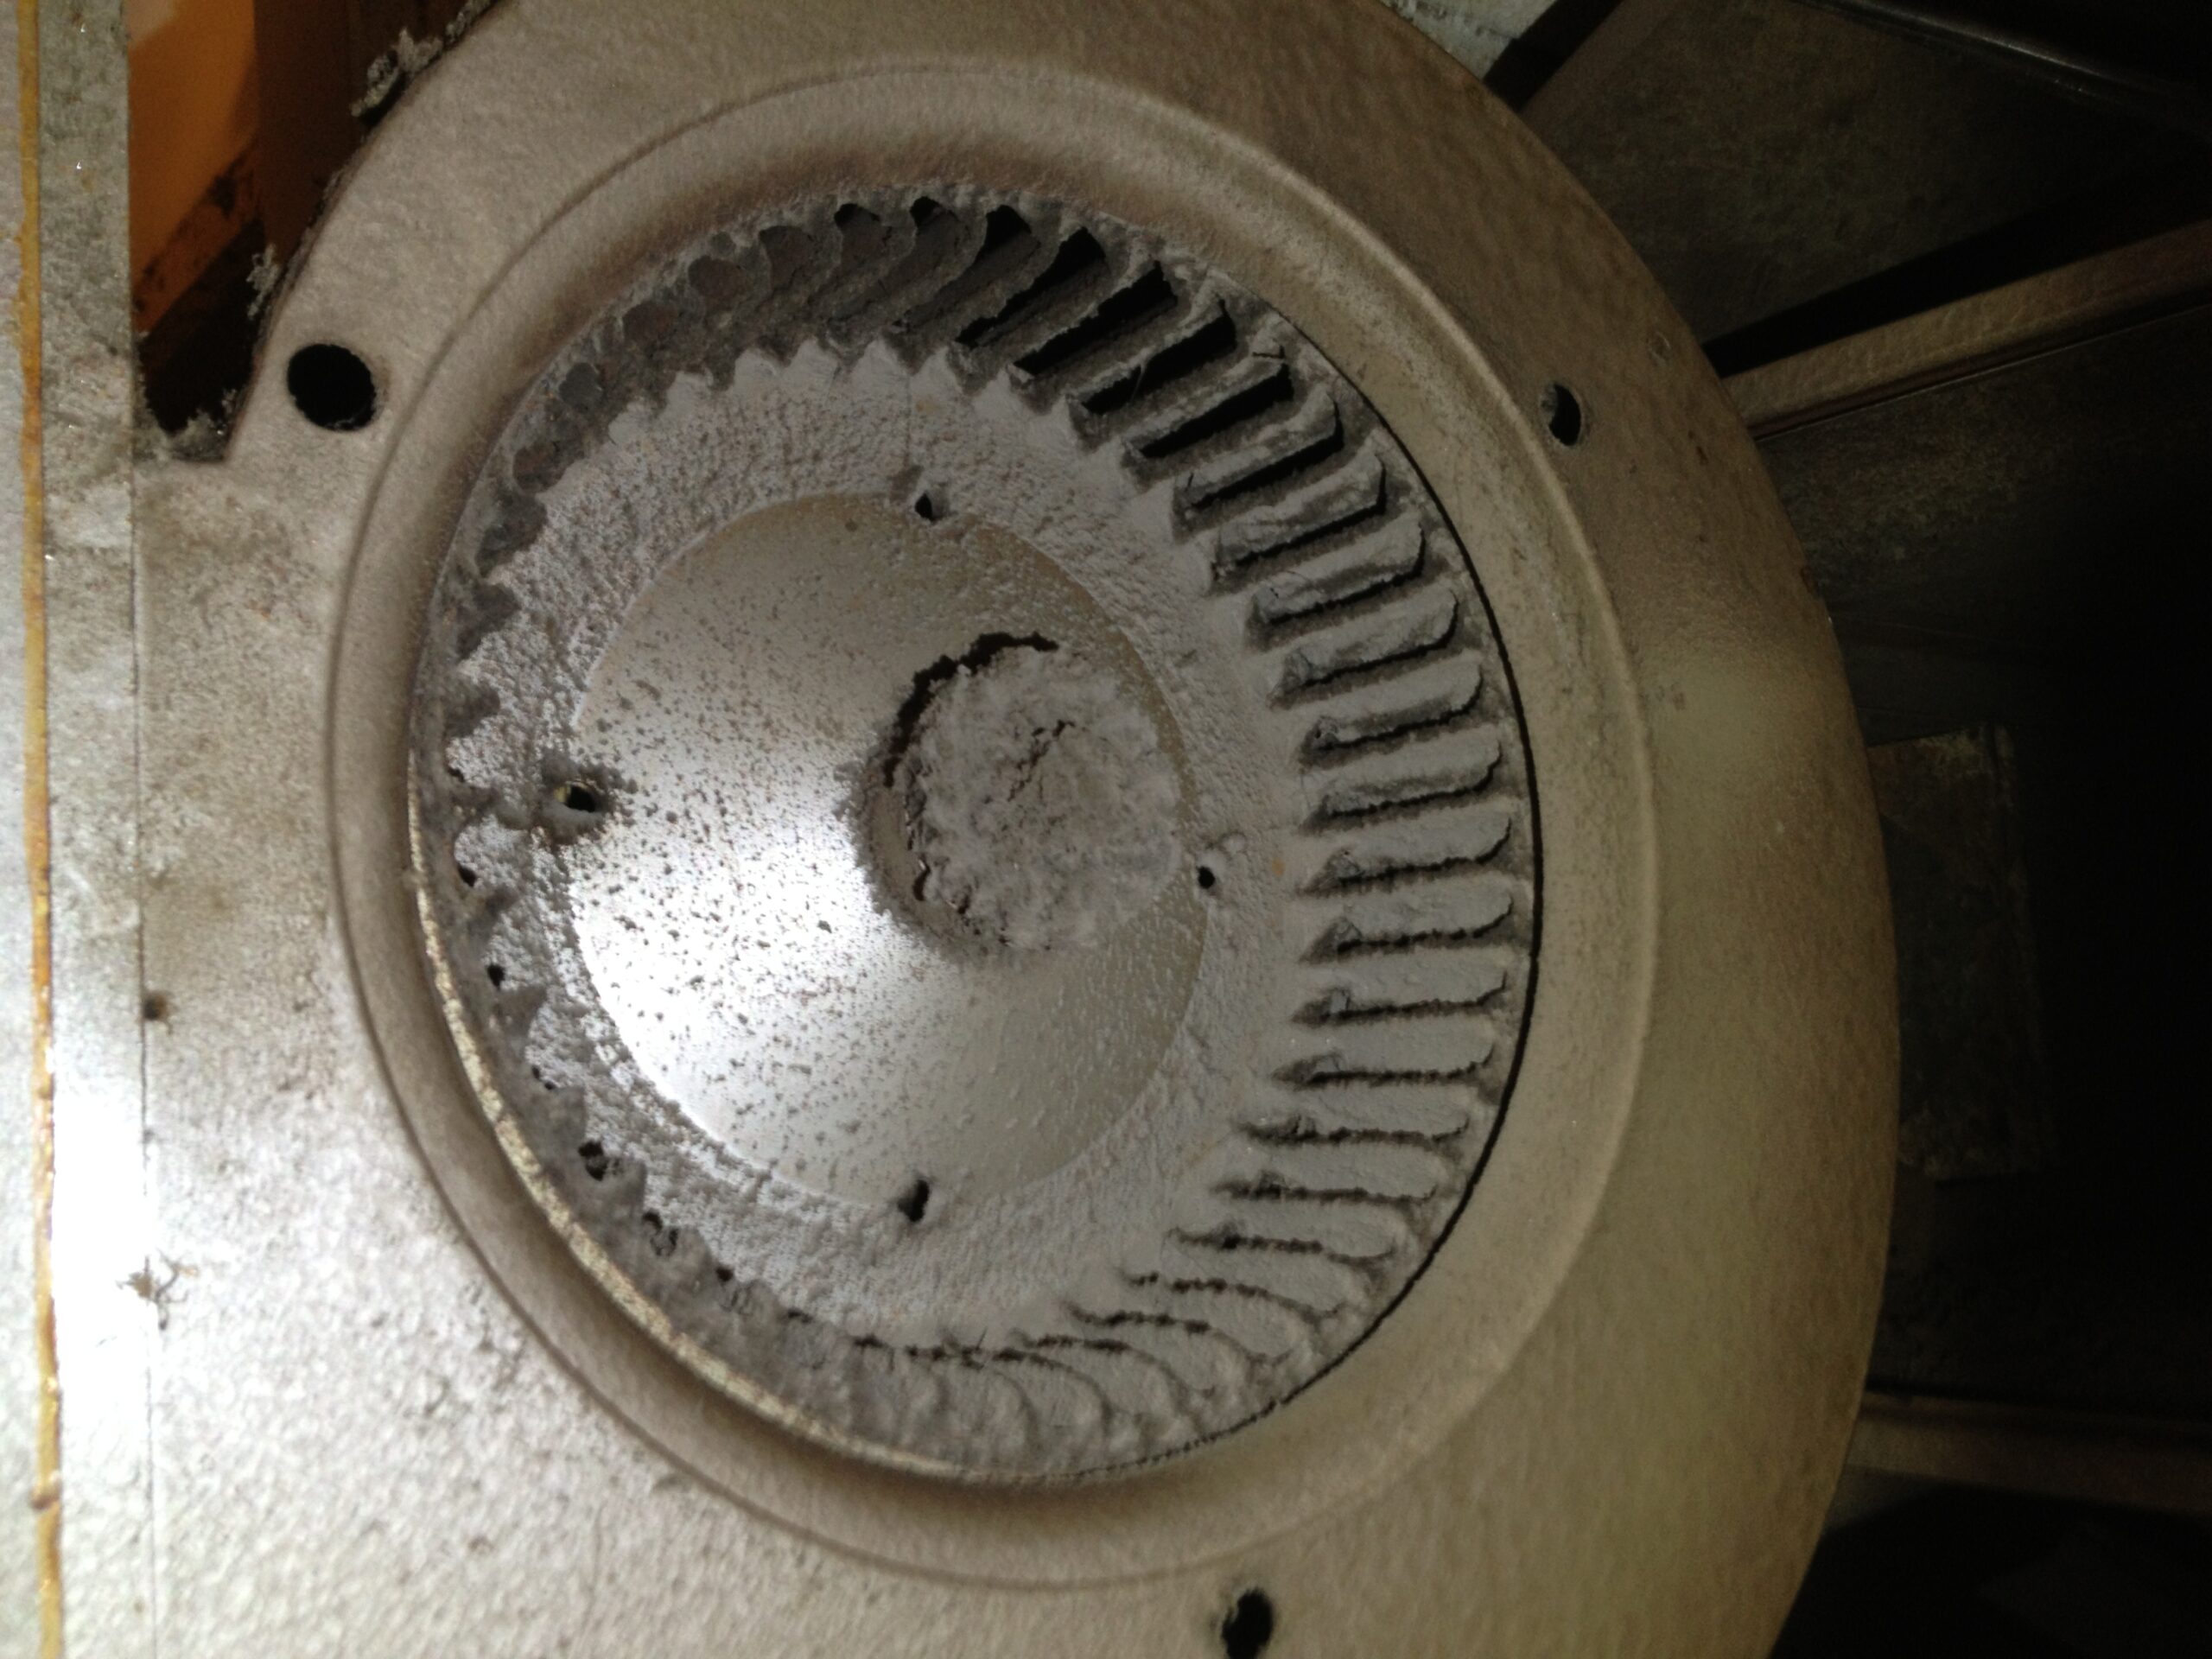 Dirty AC Blower before it has been cleaned by A-1 Duct Cleaning & Chimney Sweep